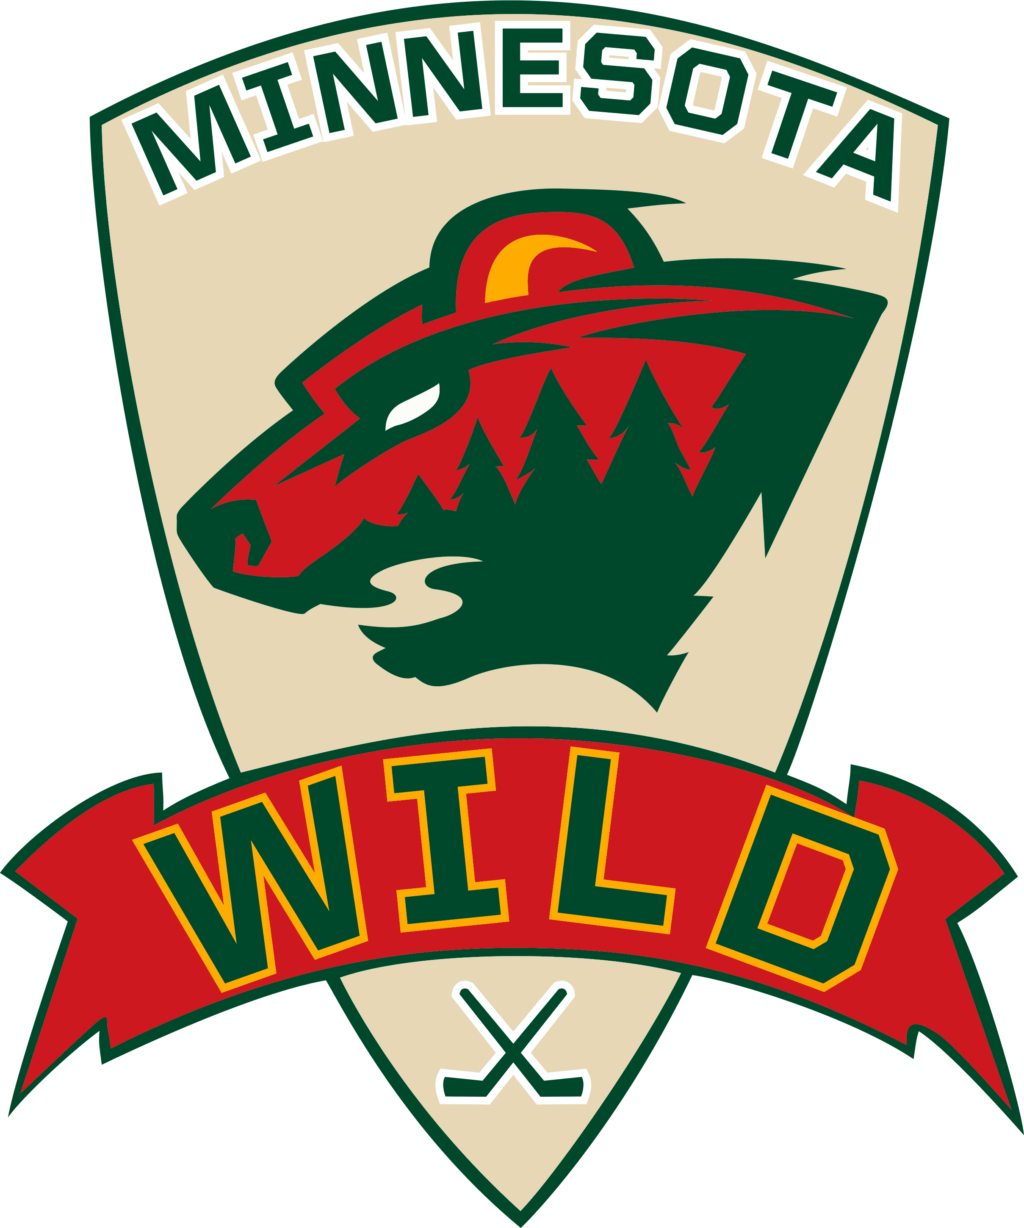 mw 16 NHL Minnesota Wild , Minnesota Wild SVG Vector, Minnesota Wild Clipart, Minnesota Wild Ice Hockey Kit SVG, DXF, PNG, EPS Instant download NHL-Files for silhouette, files for clipping.